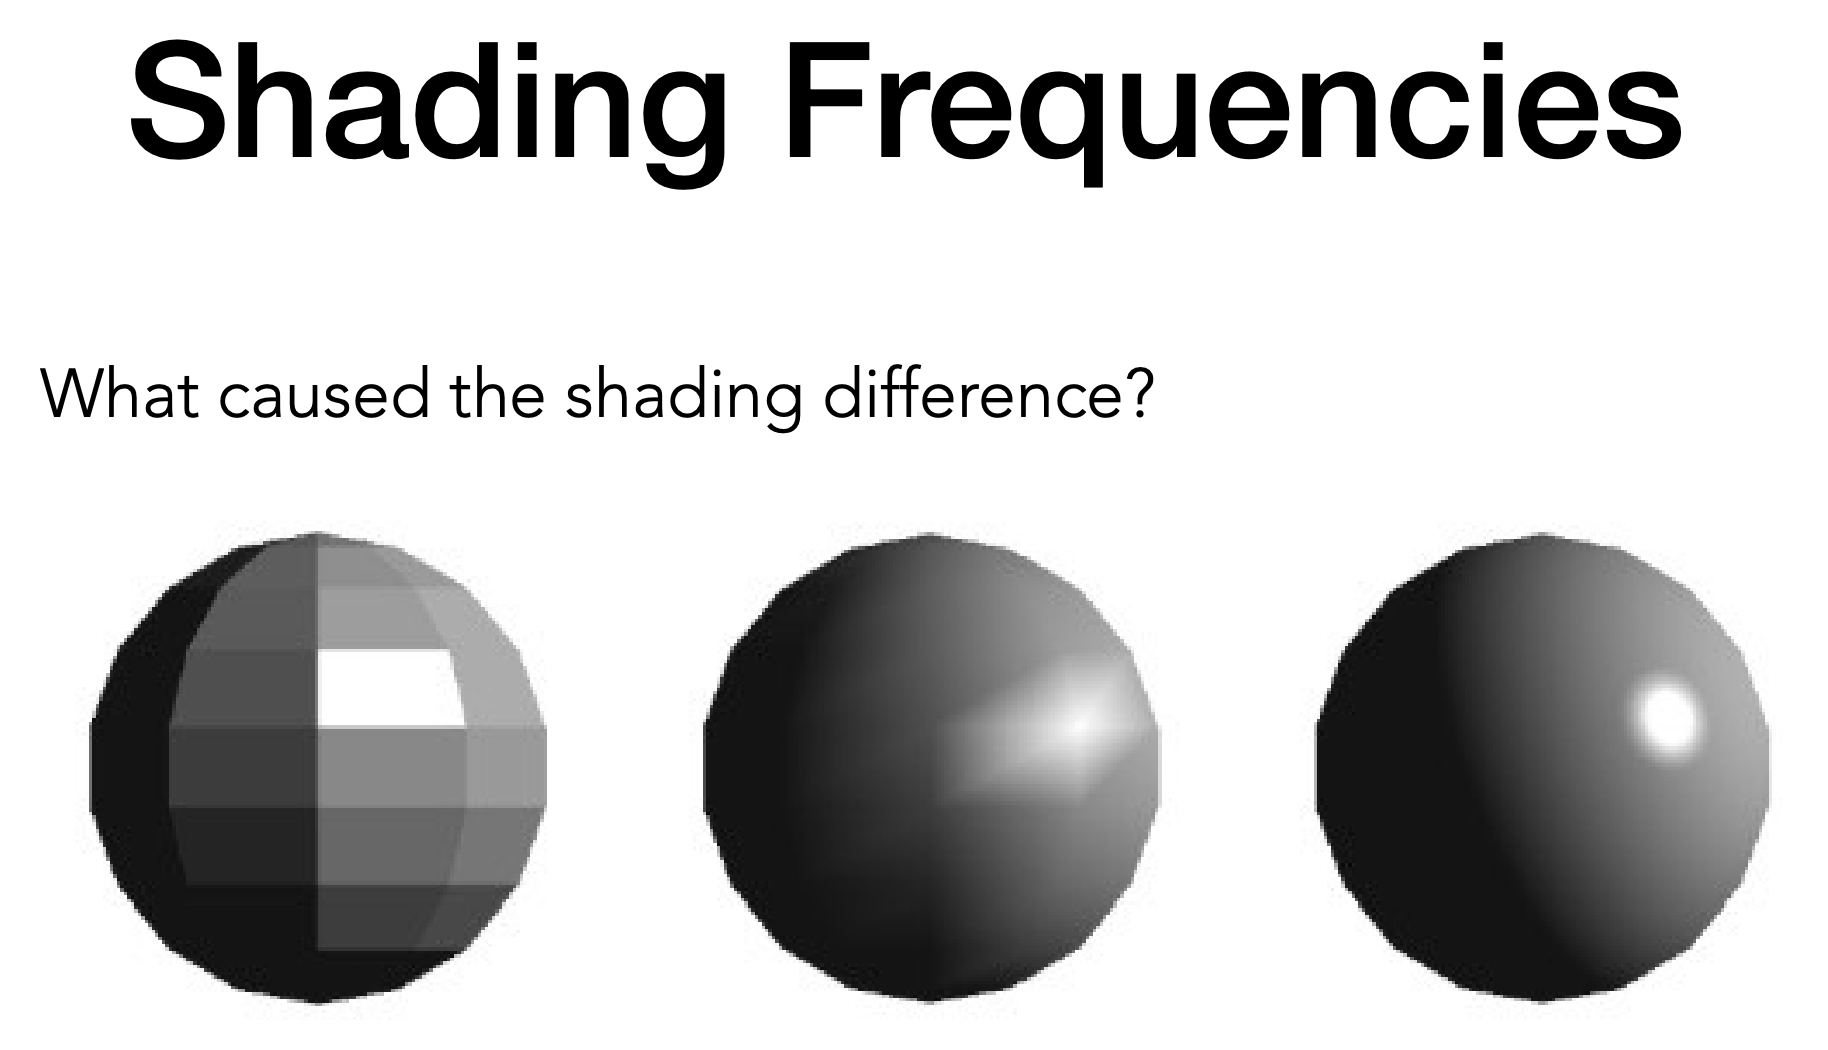 Shading Frequencies